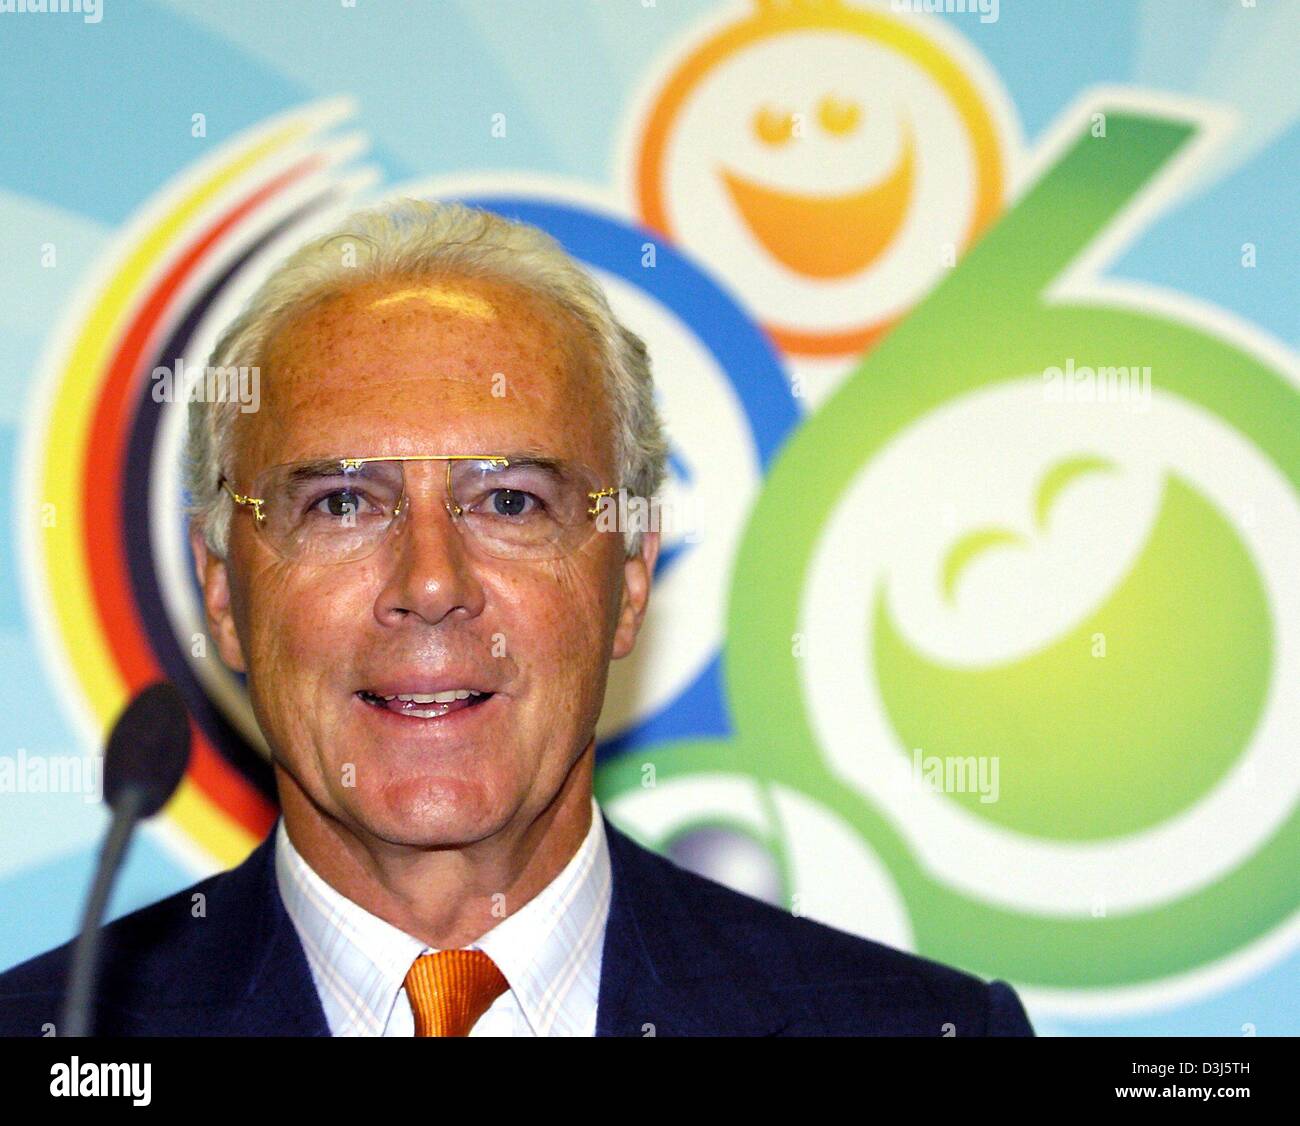 (dpa) - Former soccer star Franz Beckenbauer from Germany speaks as President of the organizing comitee about the next soccer FIFA World Cup to be held in Germany in 2006, in Basel, Switzerland, 2 June 2004, prior to a pre Euro2004 friendly match between Germany and Switzerland. In the background the logo for the 2006 World Cup. Stock Photo